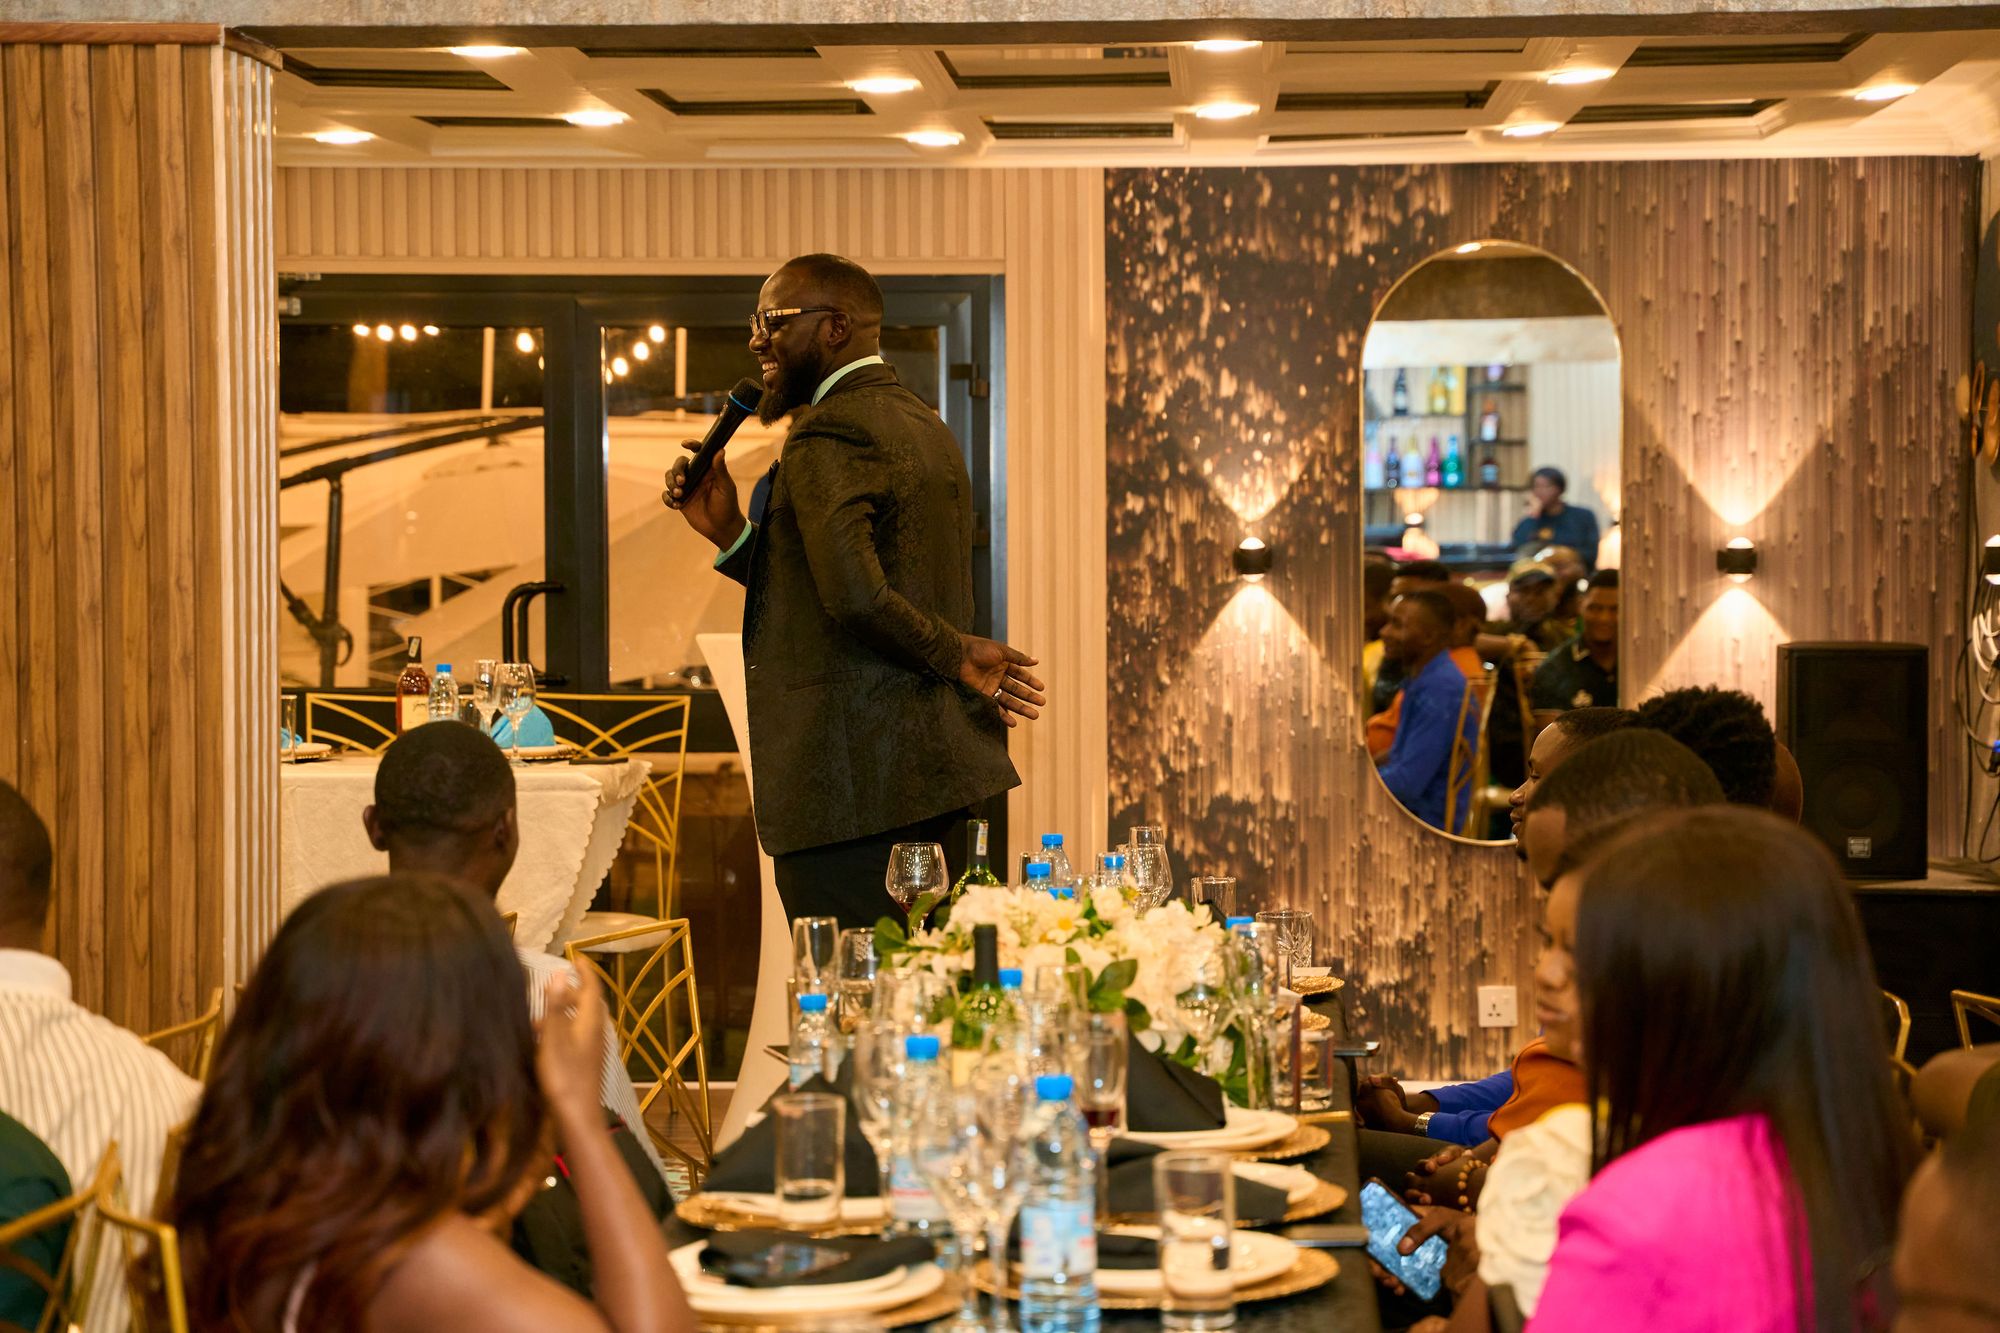 The MC entertaining guests at the Obiex Central